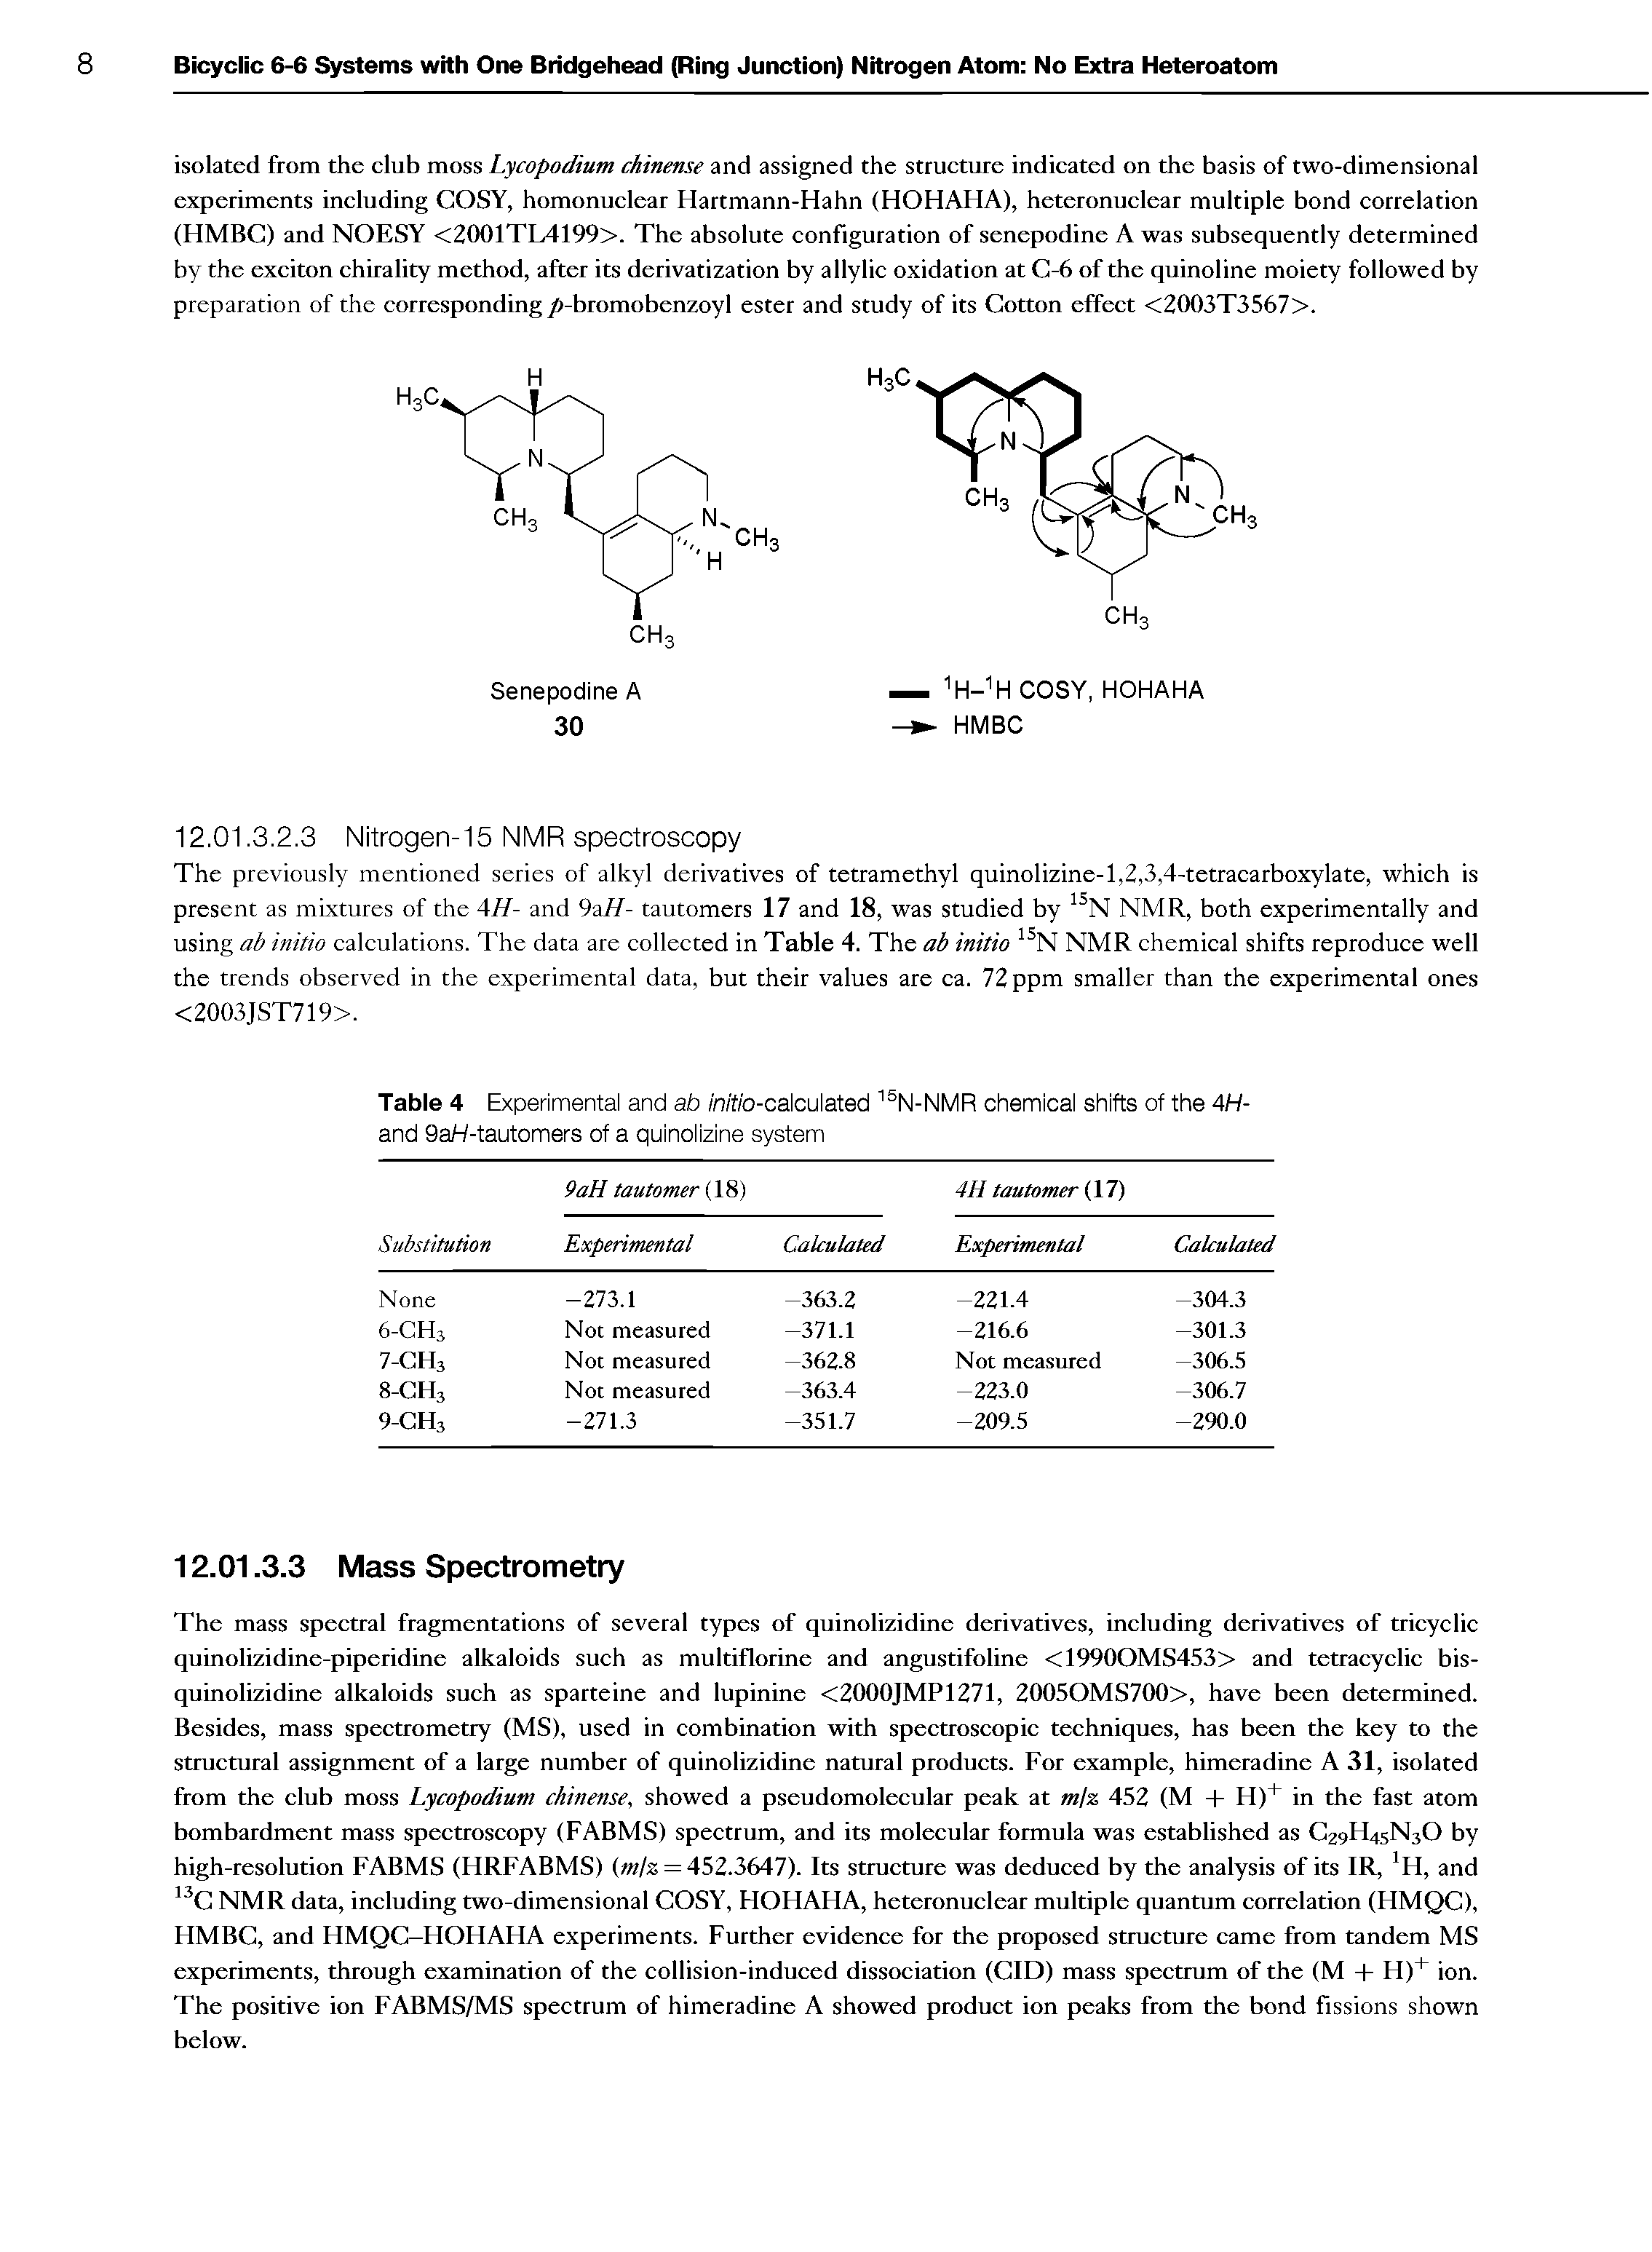 Table 4 Experimental and ab Zn/ffo-calculated 15N-NMR chemical shifts of the 4H-and 9aH-tautomers of a quinolizine system...